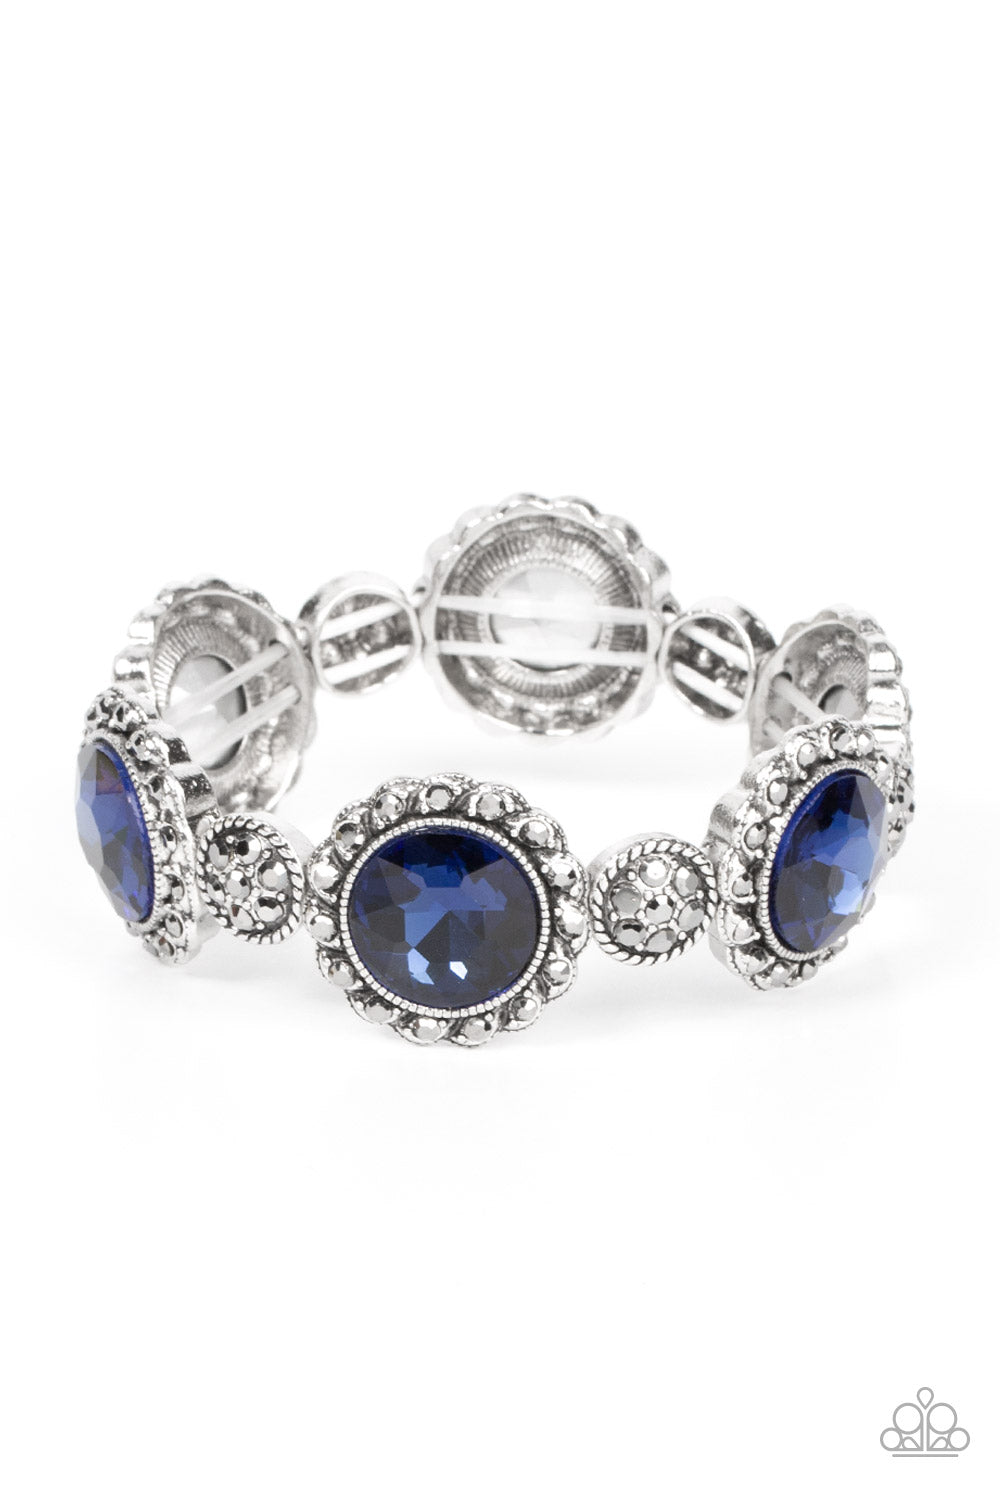 Palace Property - Blue and Silver Bracelet - Paparazzi Accessories - An oversized blue rhinestone adorns the center of a hematite rhinestone petaled floral frame. Infused with hematite dotted silver accents, the glitzy floral frames sparkle along stretchy bands around the wrist for a glamorous finish. Sold as one individual bracelet.